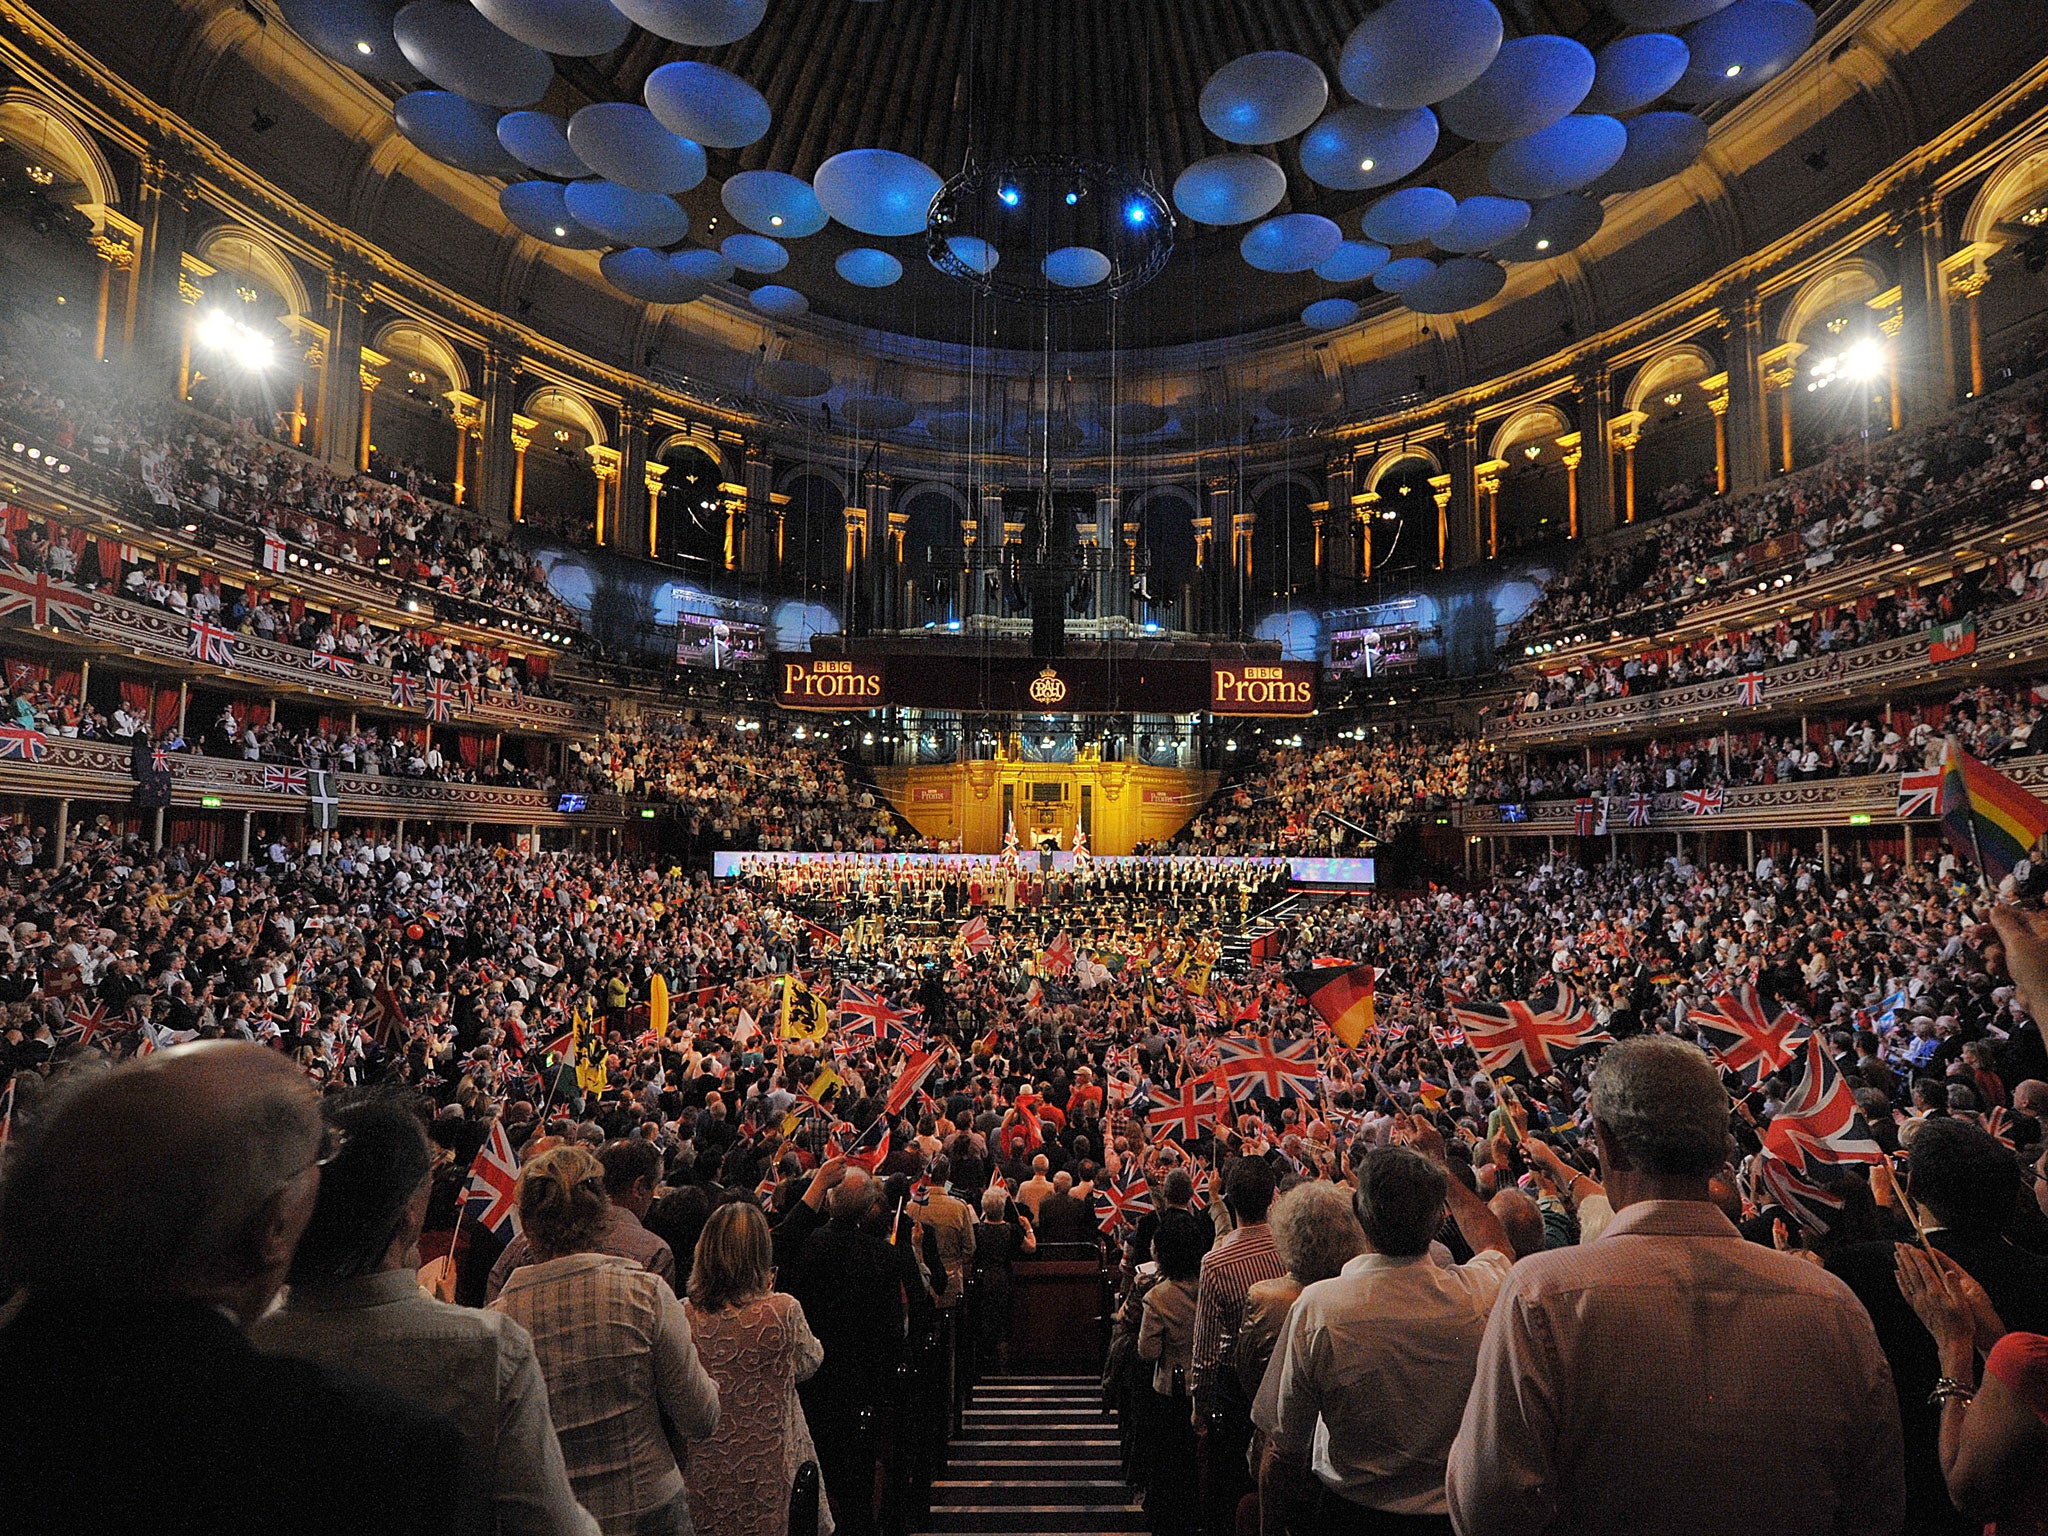 Revellers at the Proms at London’s Royal Albert Hall, one of hundreds of live music venues under threat